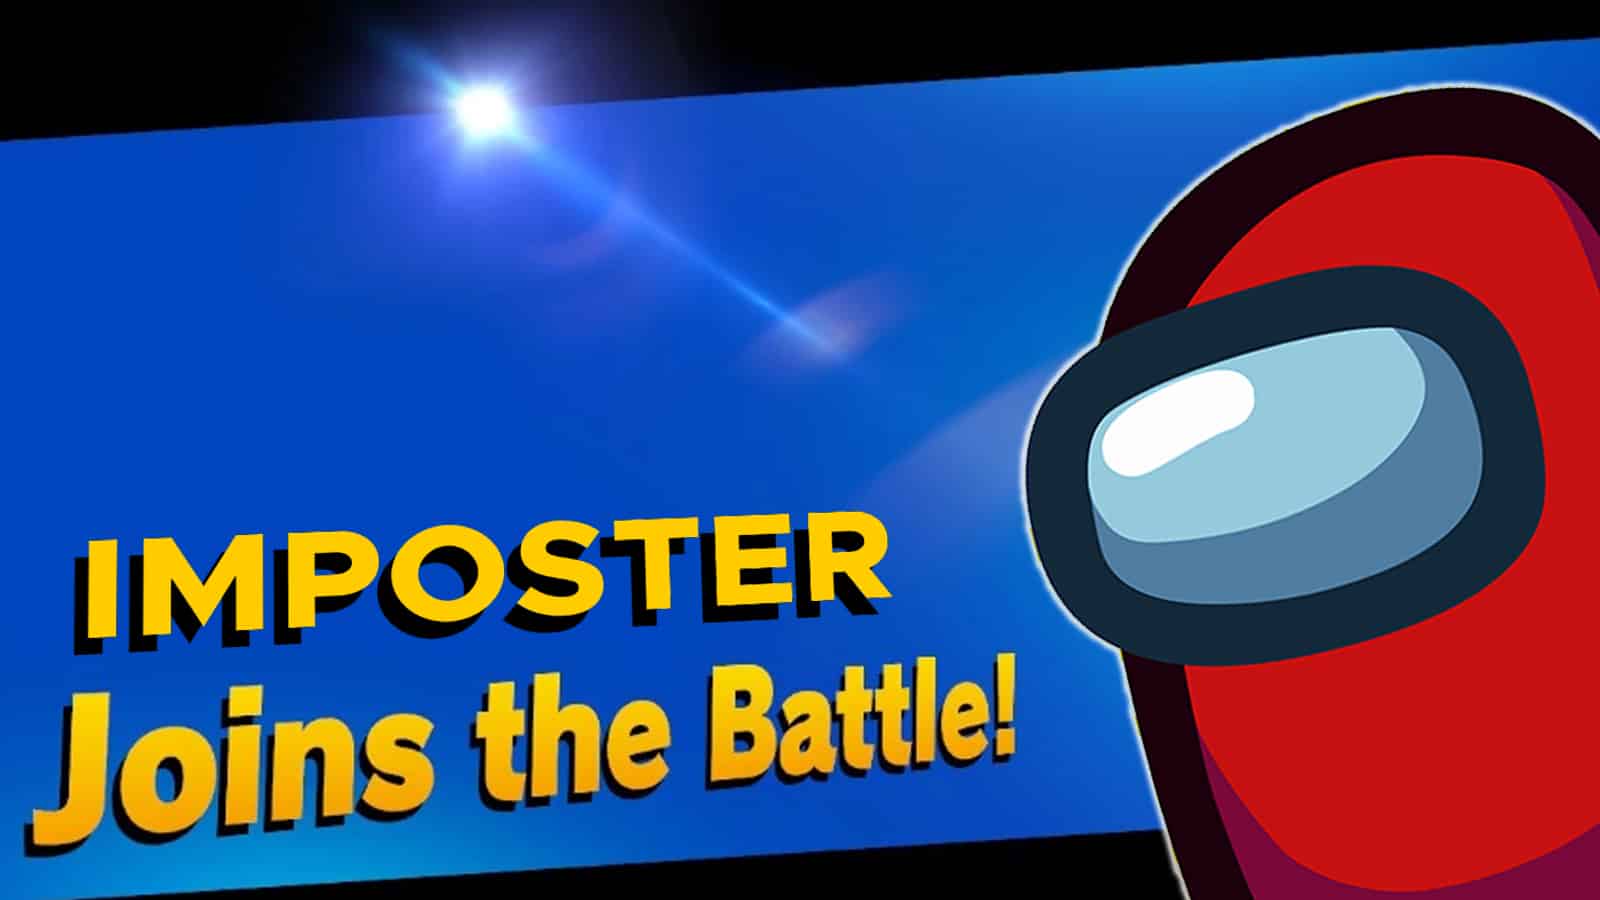 An image of an Among Us character in Super Smash Bros Ultimate.